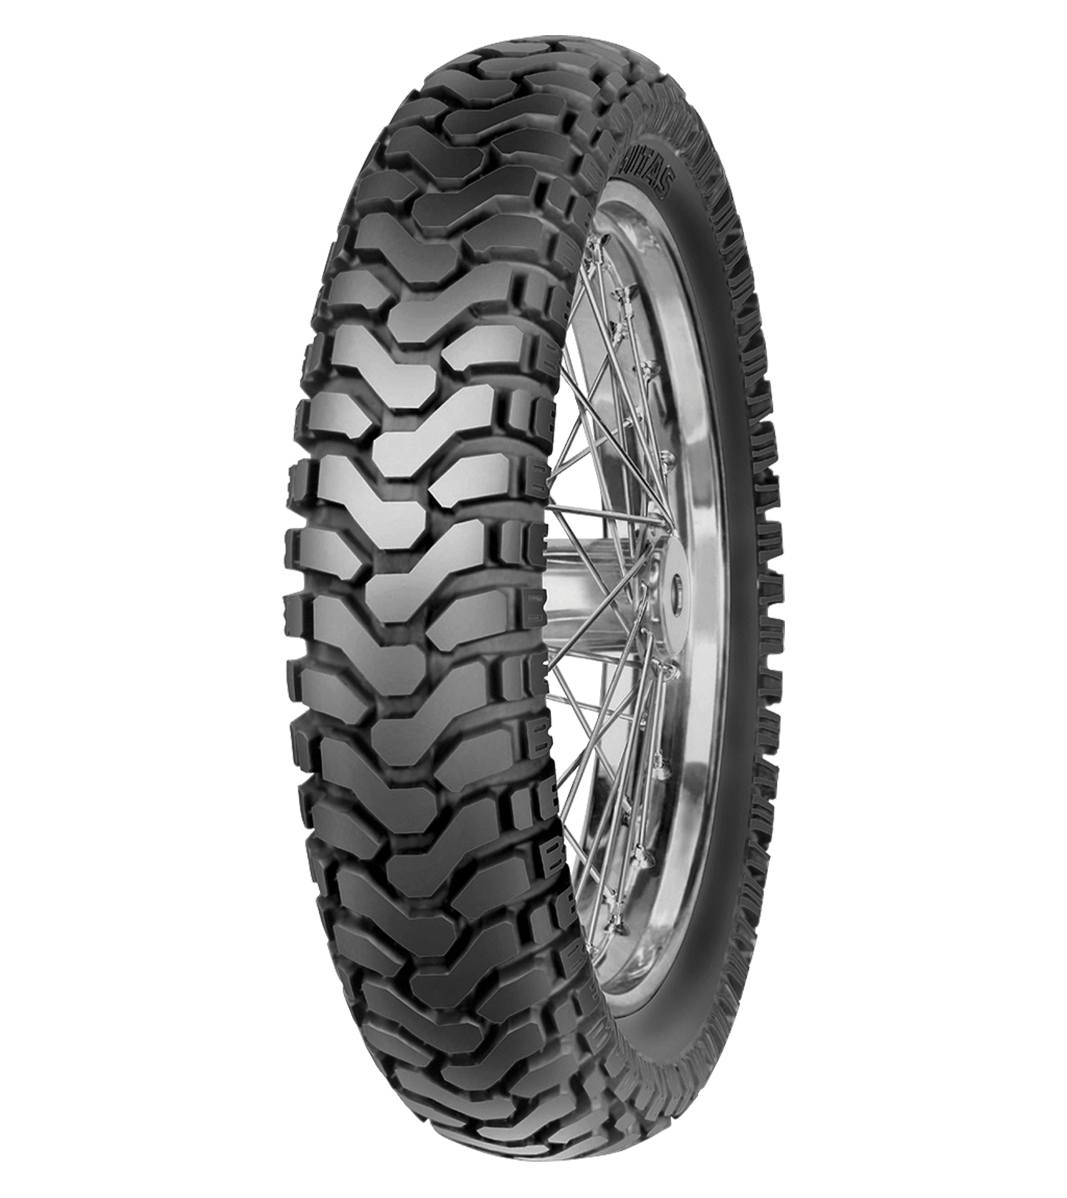 Mitas E-07 ENDURO 150/70-17 Trail OFF Trail 69T No Stripe Tubeless Rear Tire, 224049, 150/70-17, Adventure Touring, E Series, E-07 Enduro, Rear, Trail, Trail OFF, Tires - Imported and distributed in North & South America by Lindeco Genuine Powersports - Premier Powersports Equipment and Accessories for Motorcycle Enthusiasts, Professional Riders and Dealers.